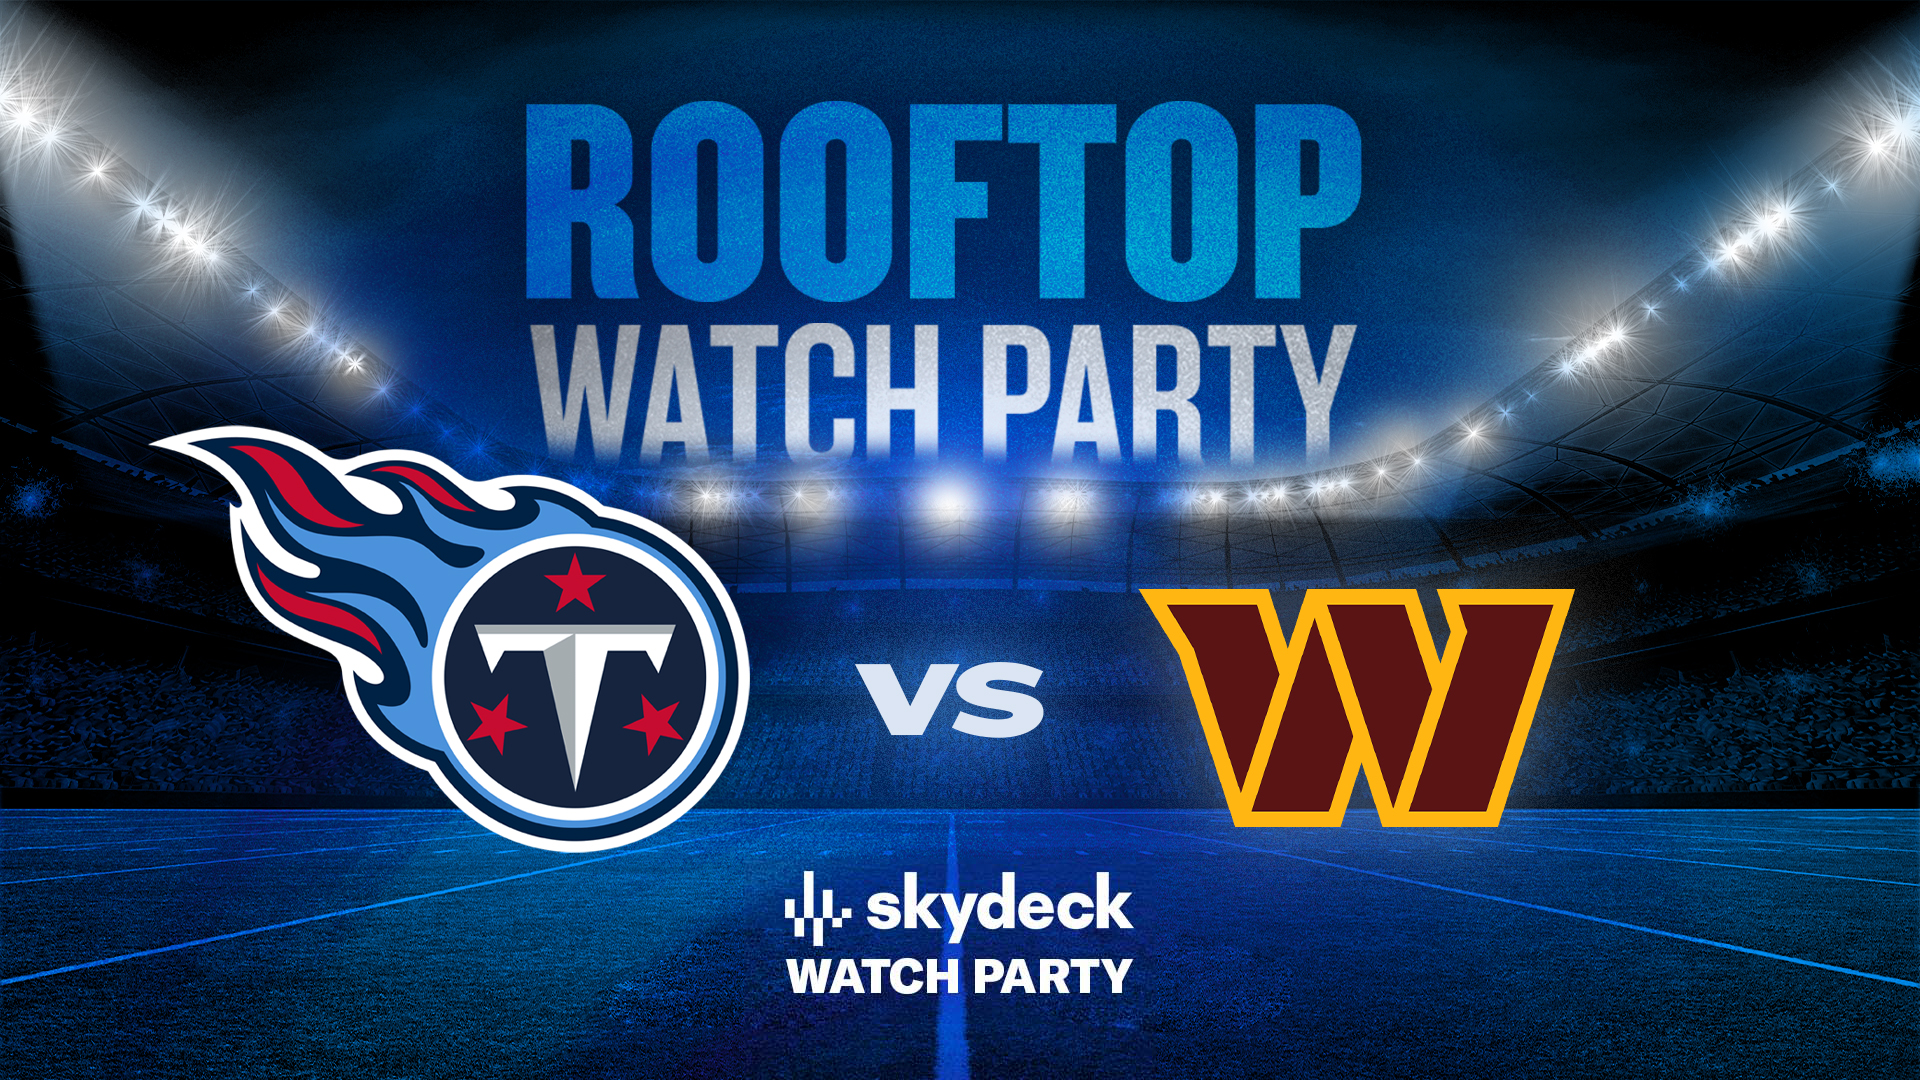 Promo image of Titans vs. Commanders | Skydeck Watch Party